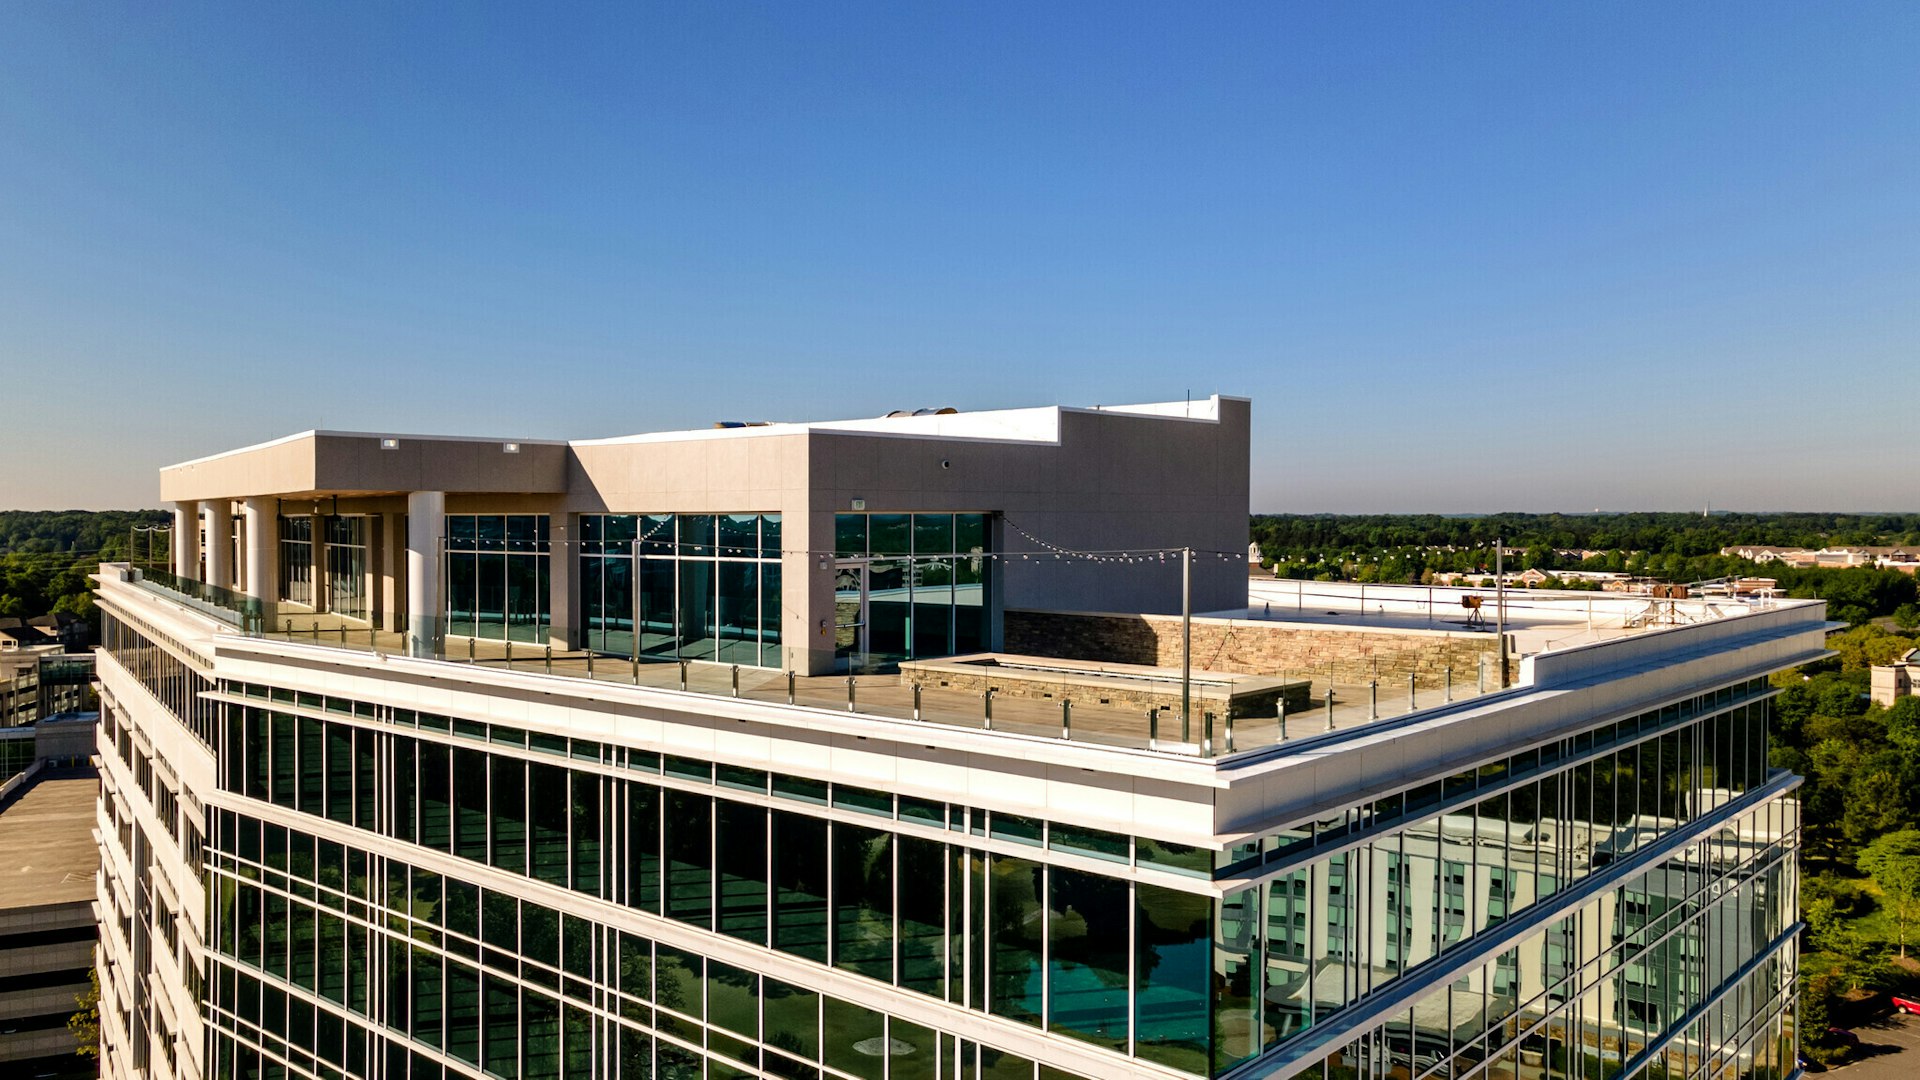 Drone of rooftop amenity space on Overlook Building in Ballantyne